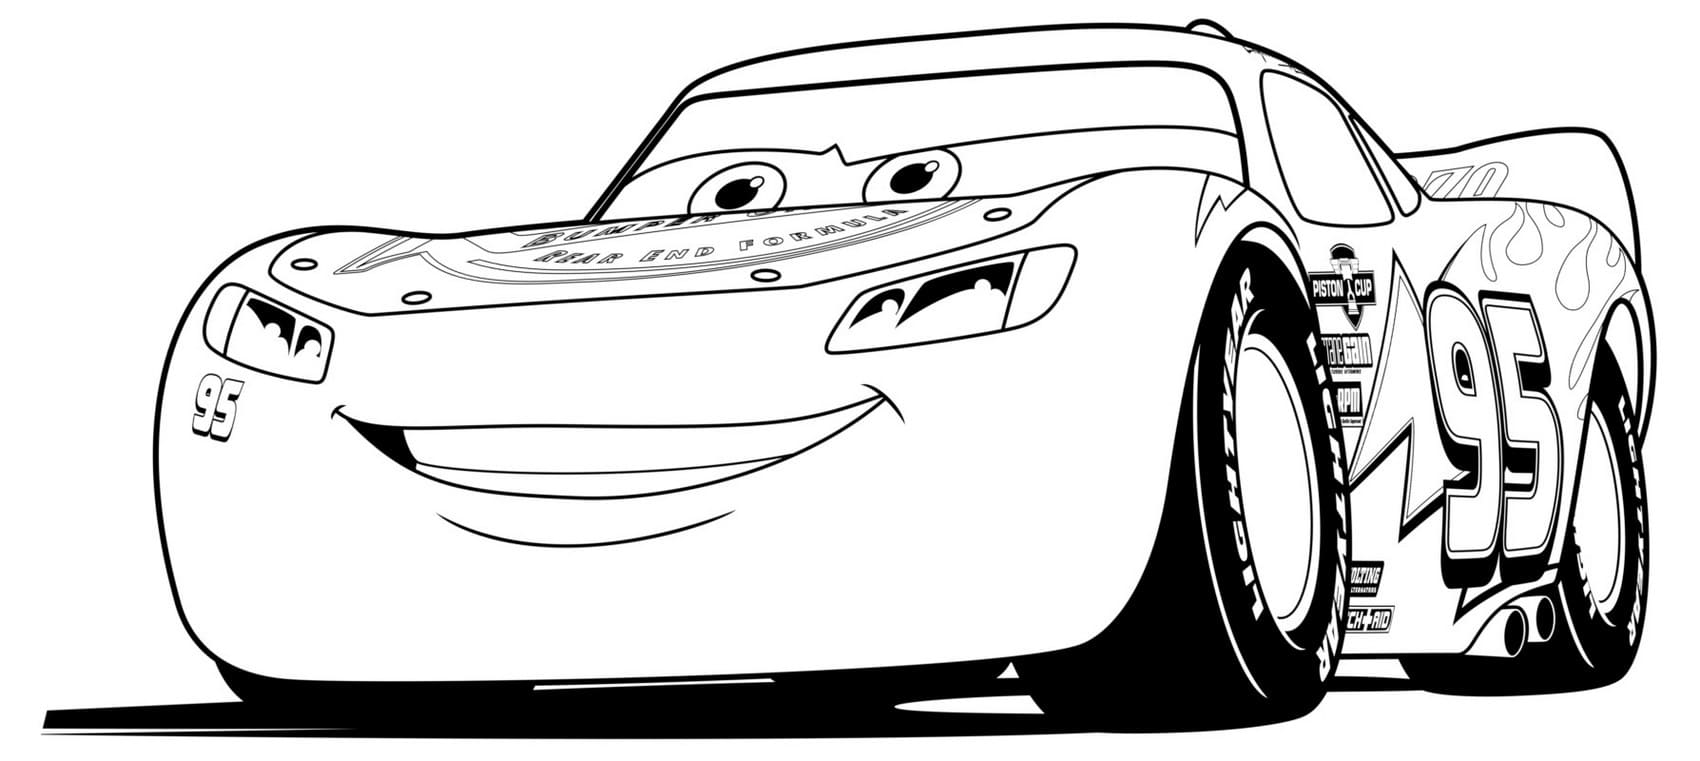 Lightning Mcqueen Coloring Page Printable